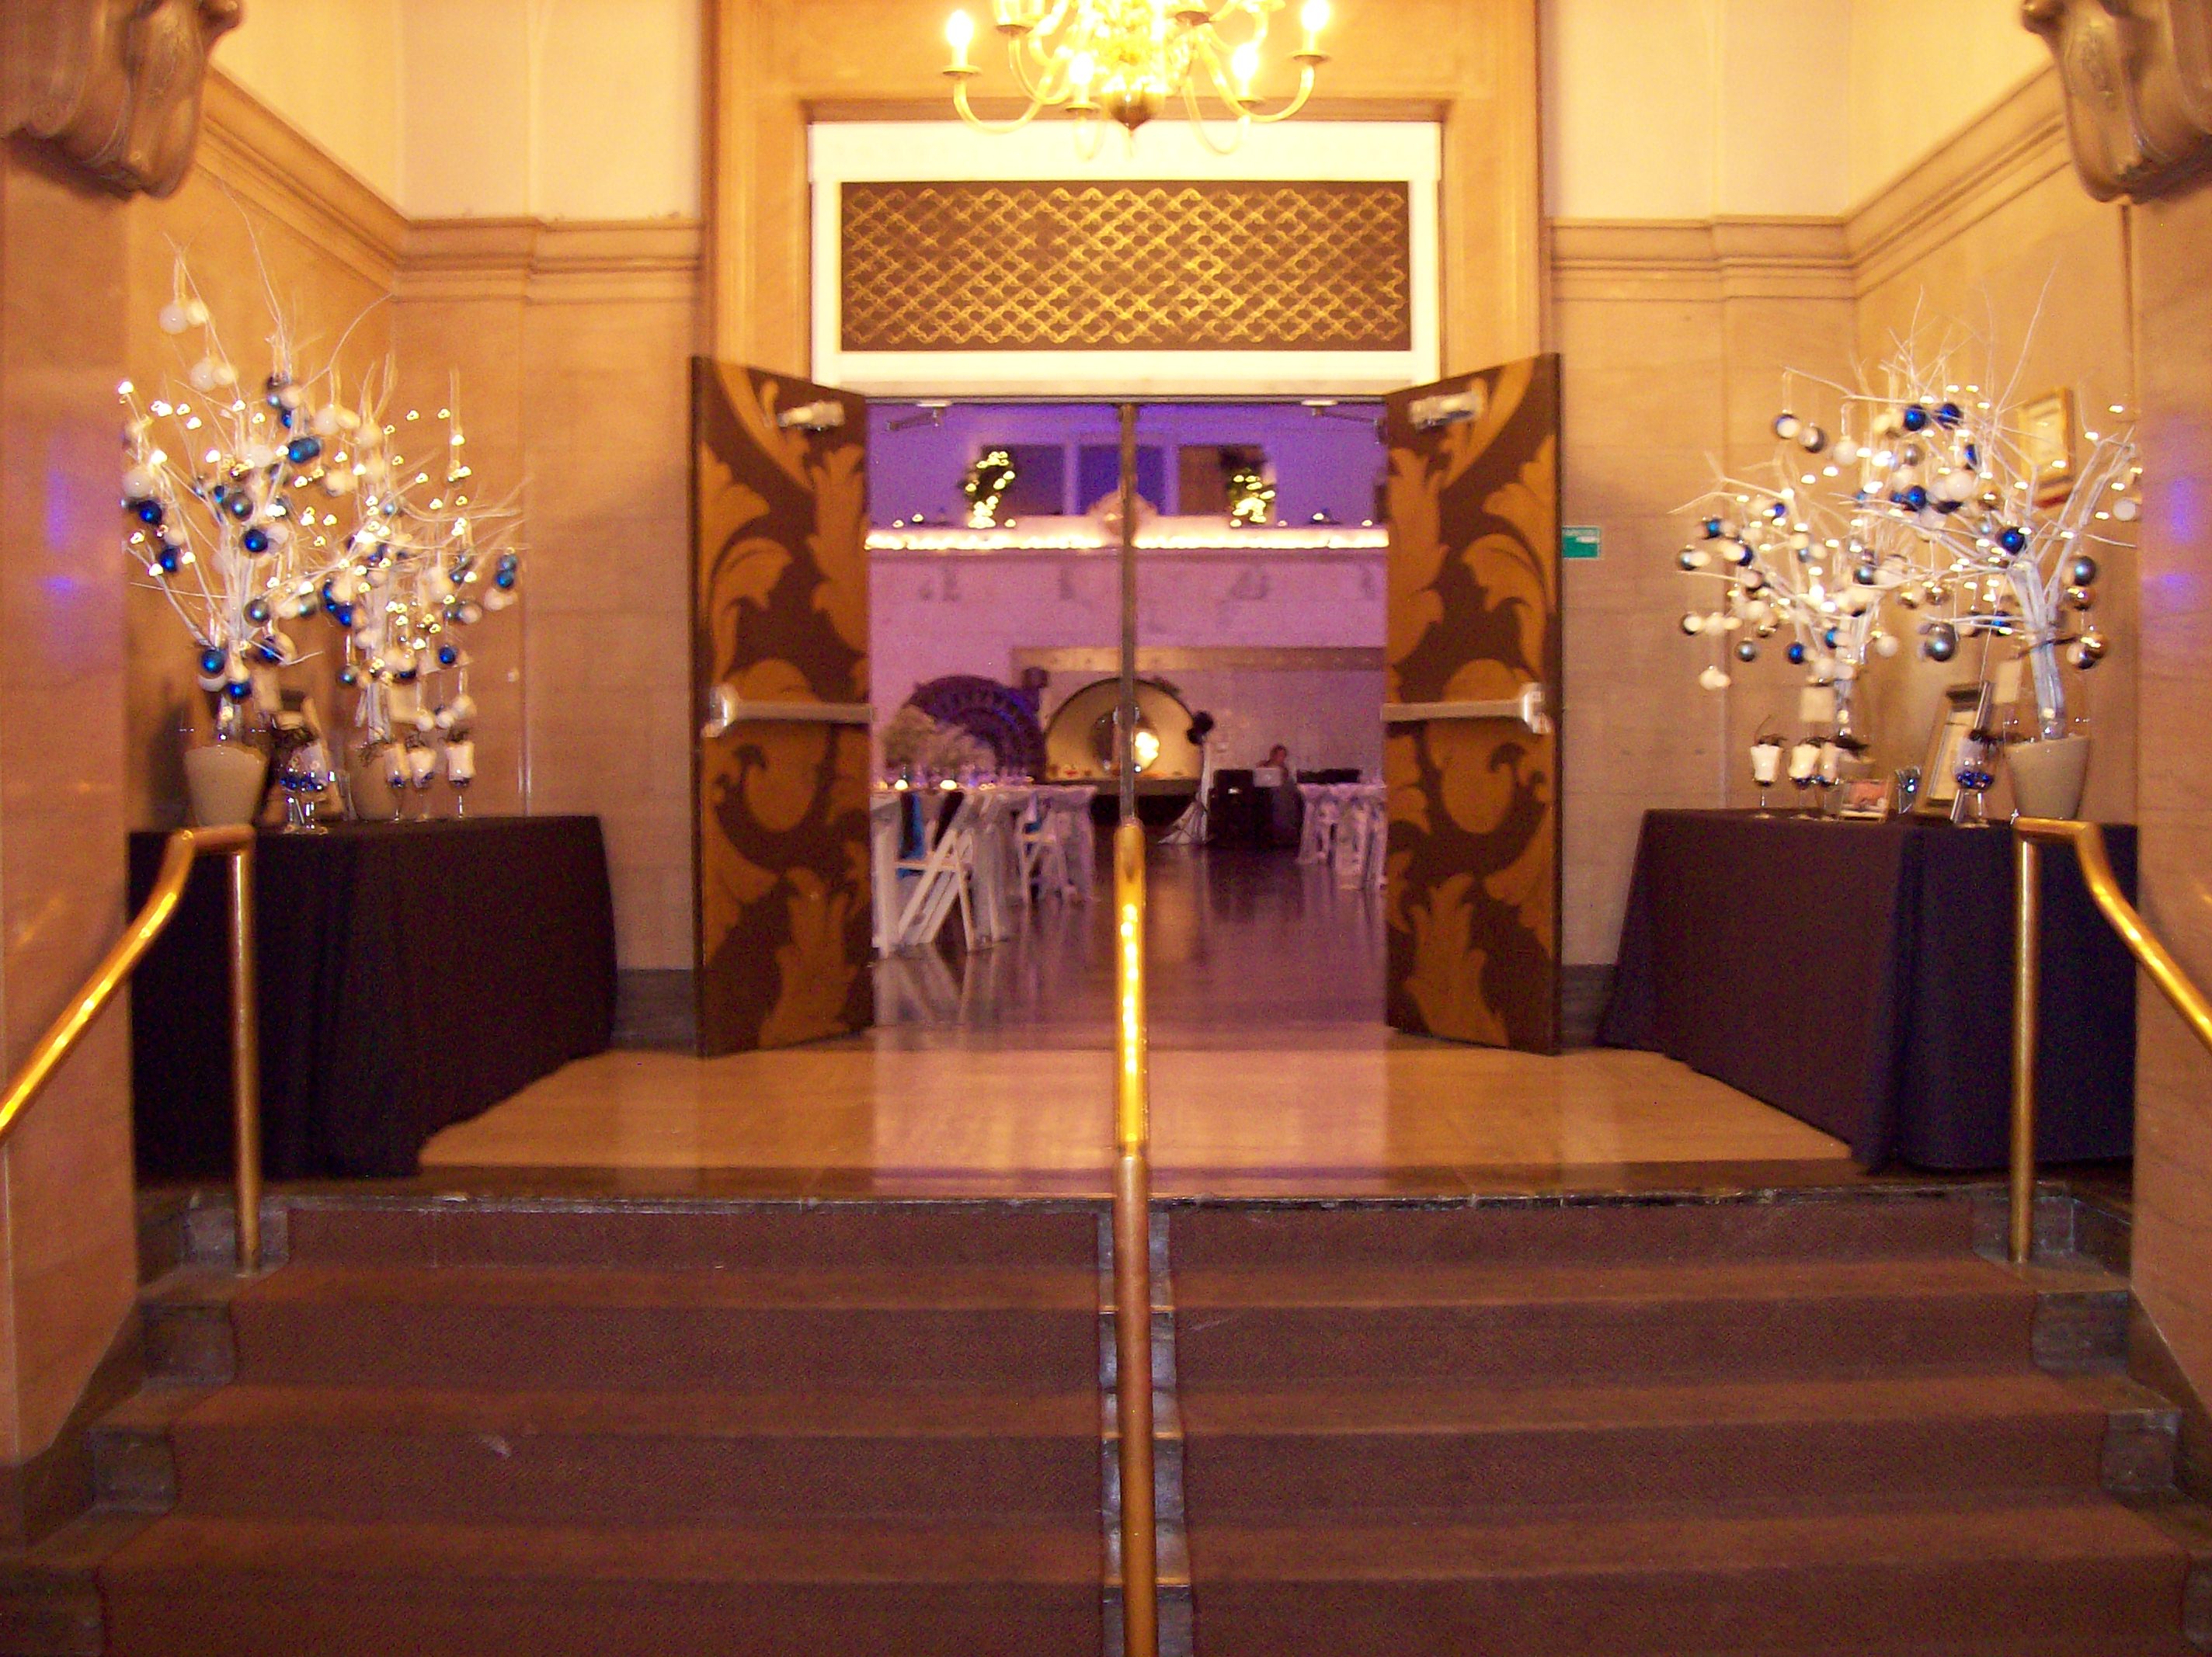 Tables in hall for guestbook, place cards, etc.